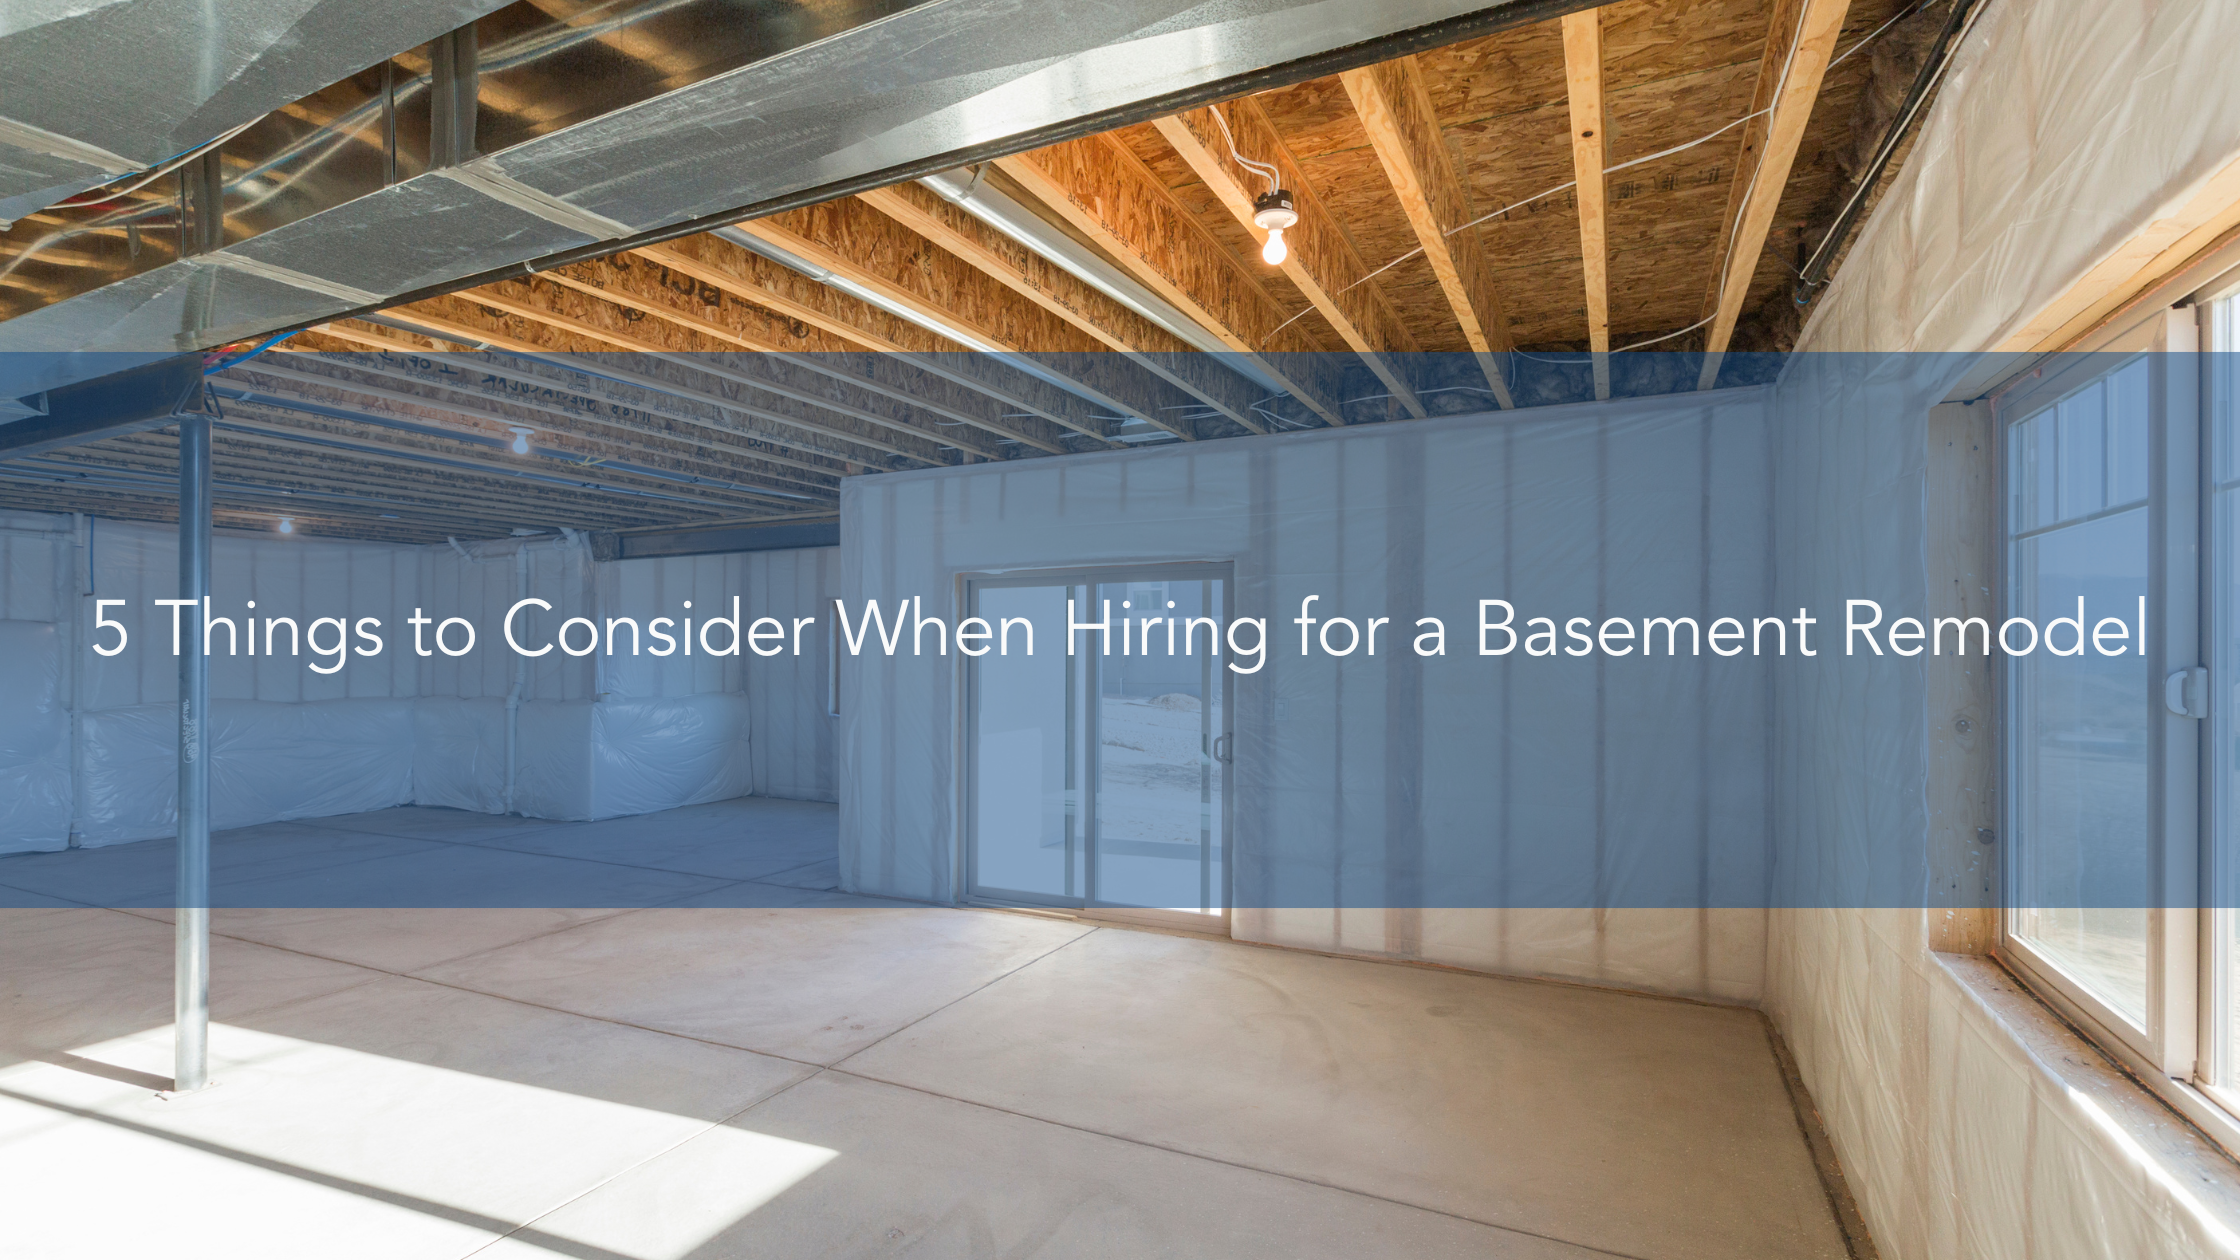 5 Things to Consider When Hiring for a Basement Remodel